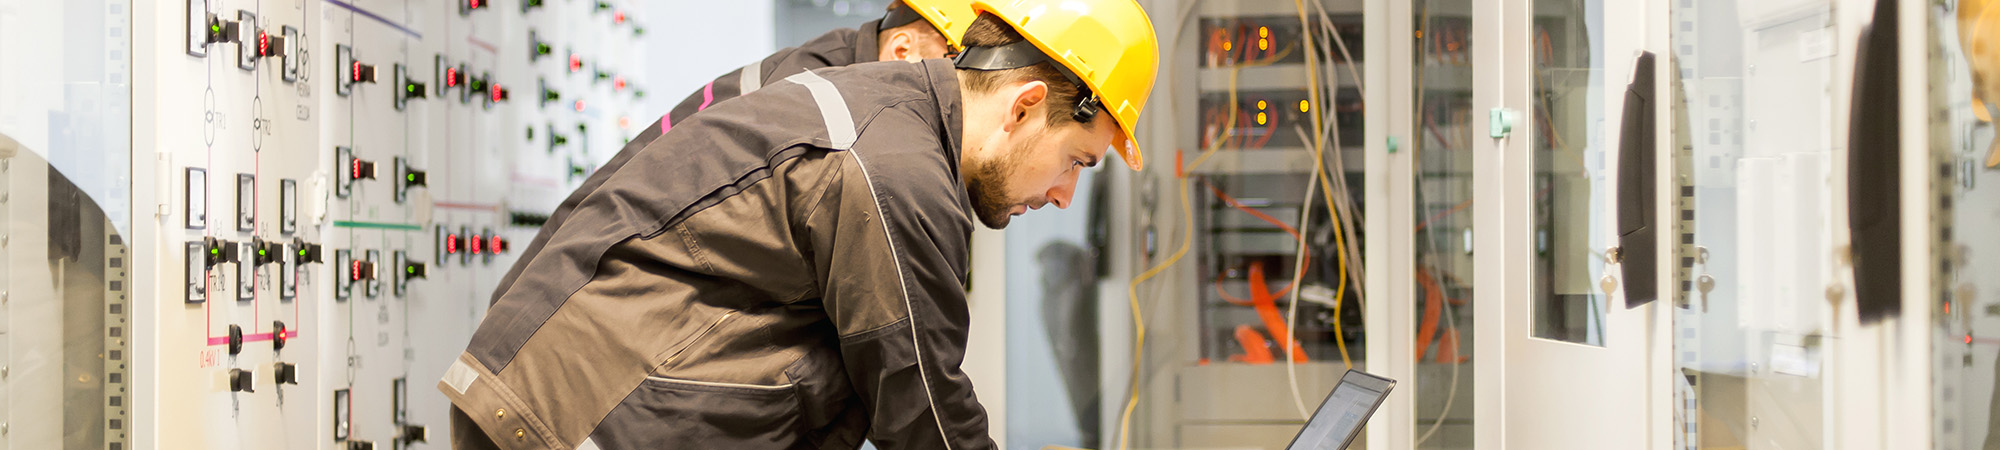 Electrical Contractor Recruitment